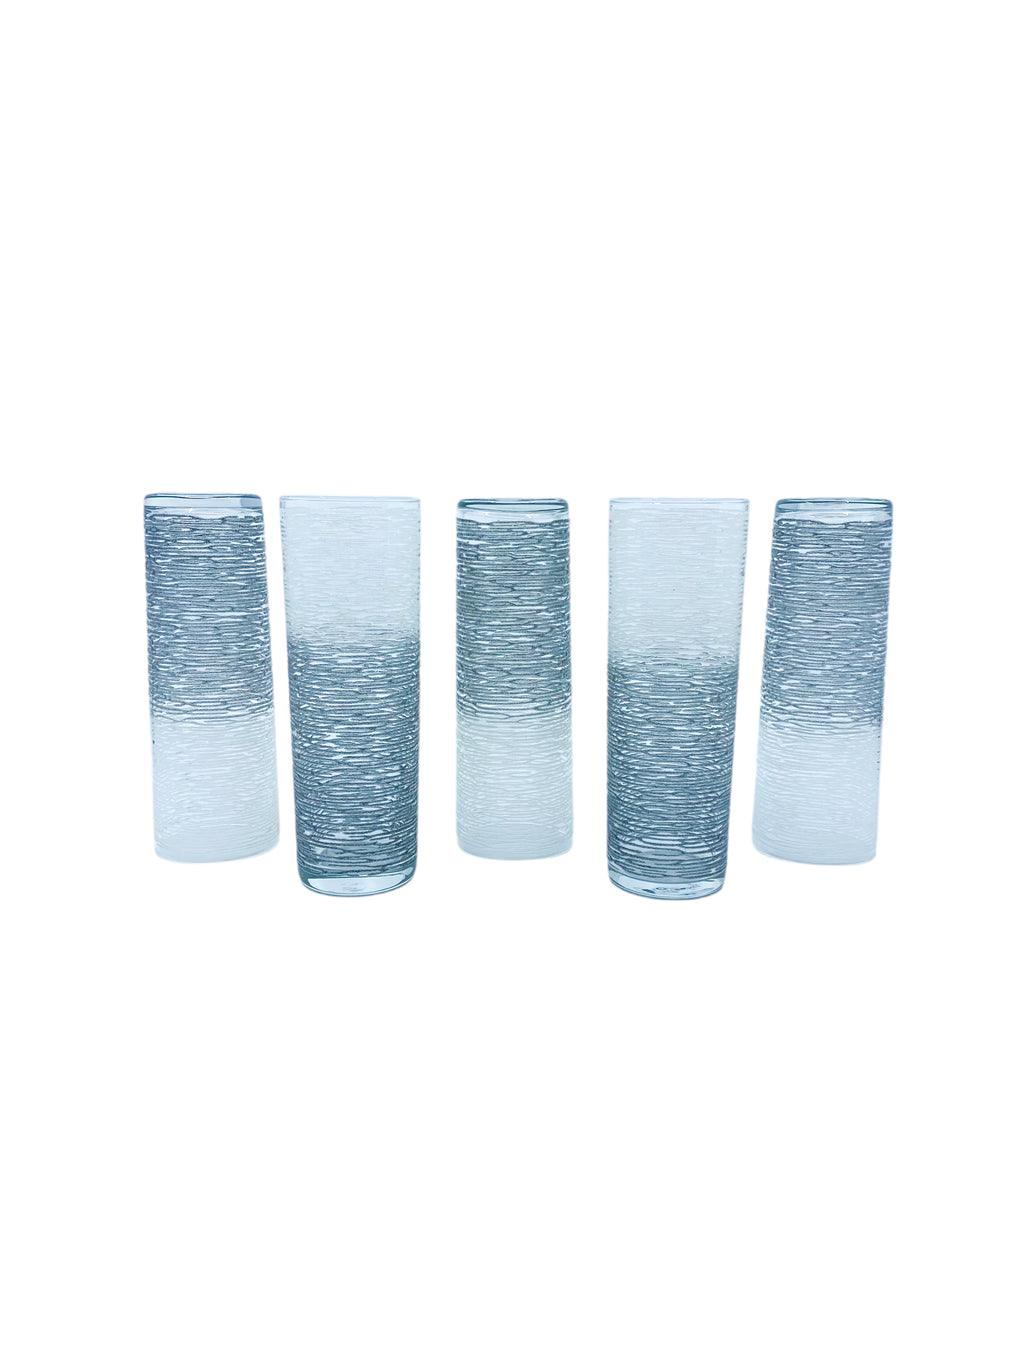 Vintage Libbey Gray Ombre Textured Tom Collins Glasses, Set of 5